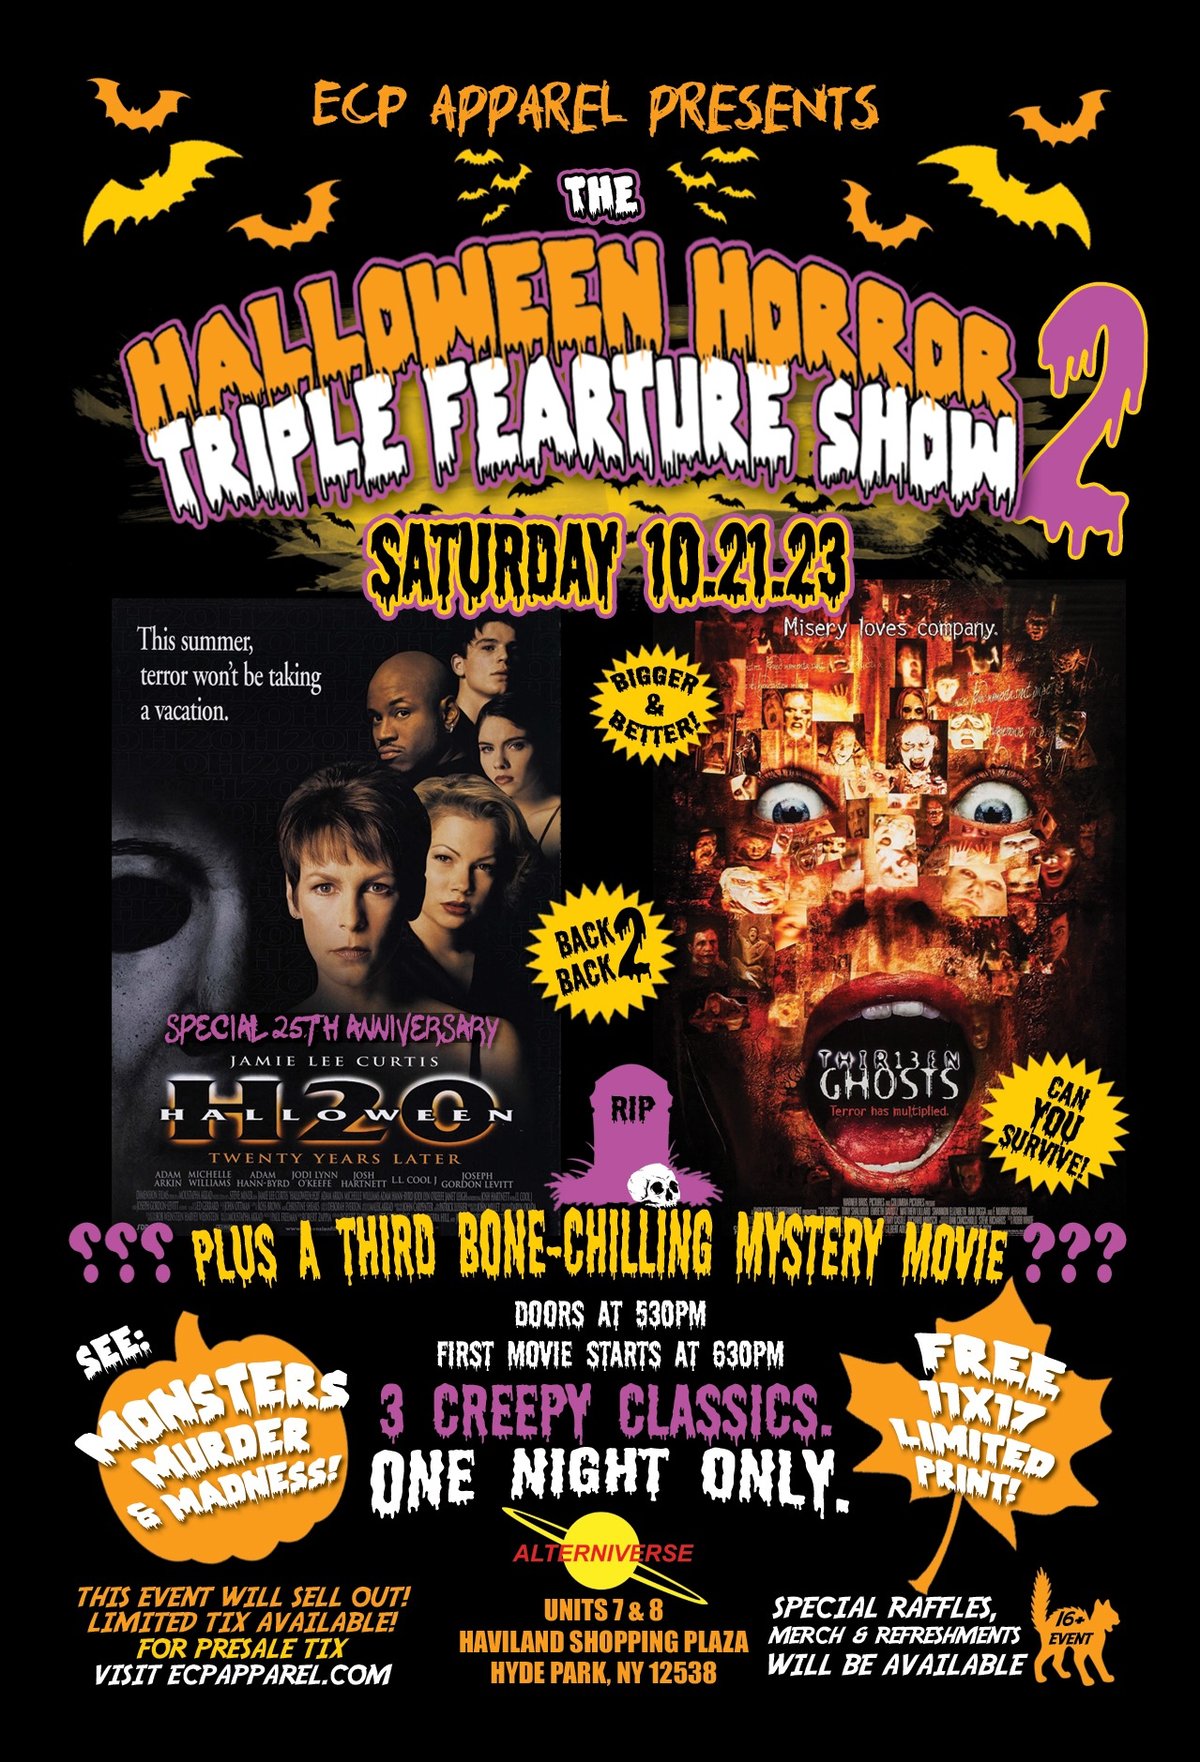 1 ticket to the “HALLOWEEN HORROR TRIPLE FEARture SHOW”